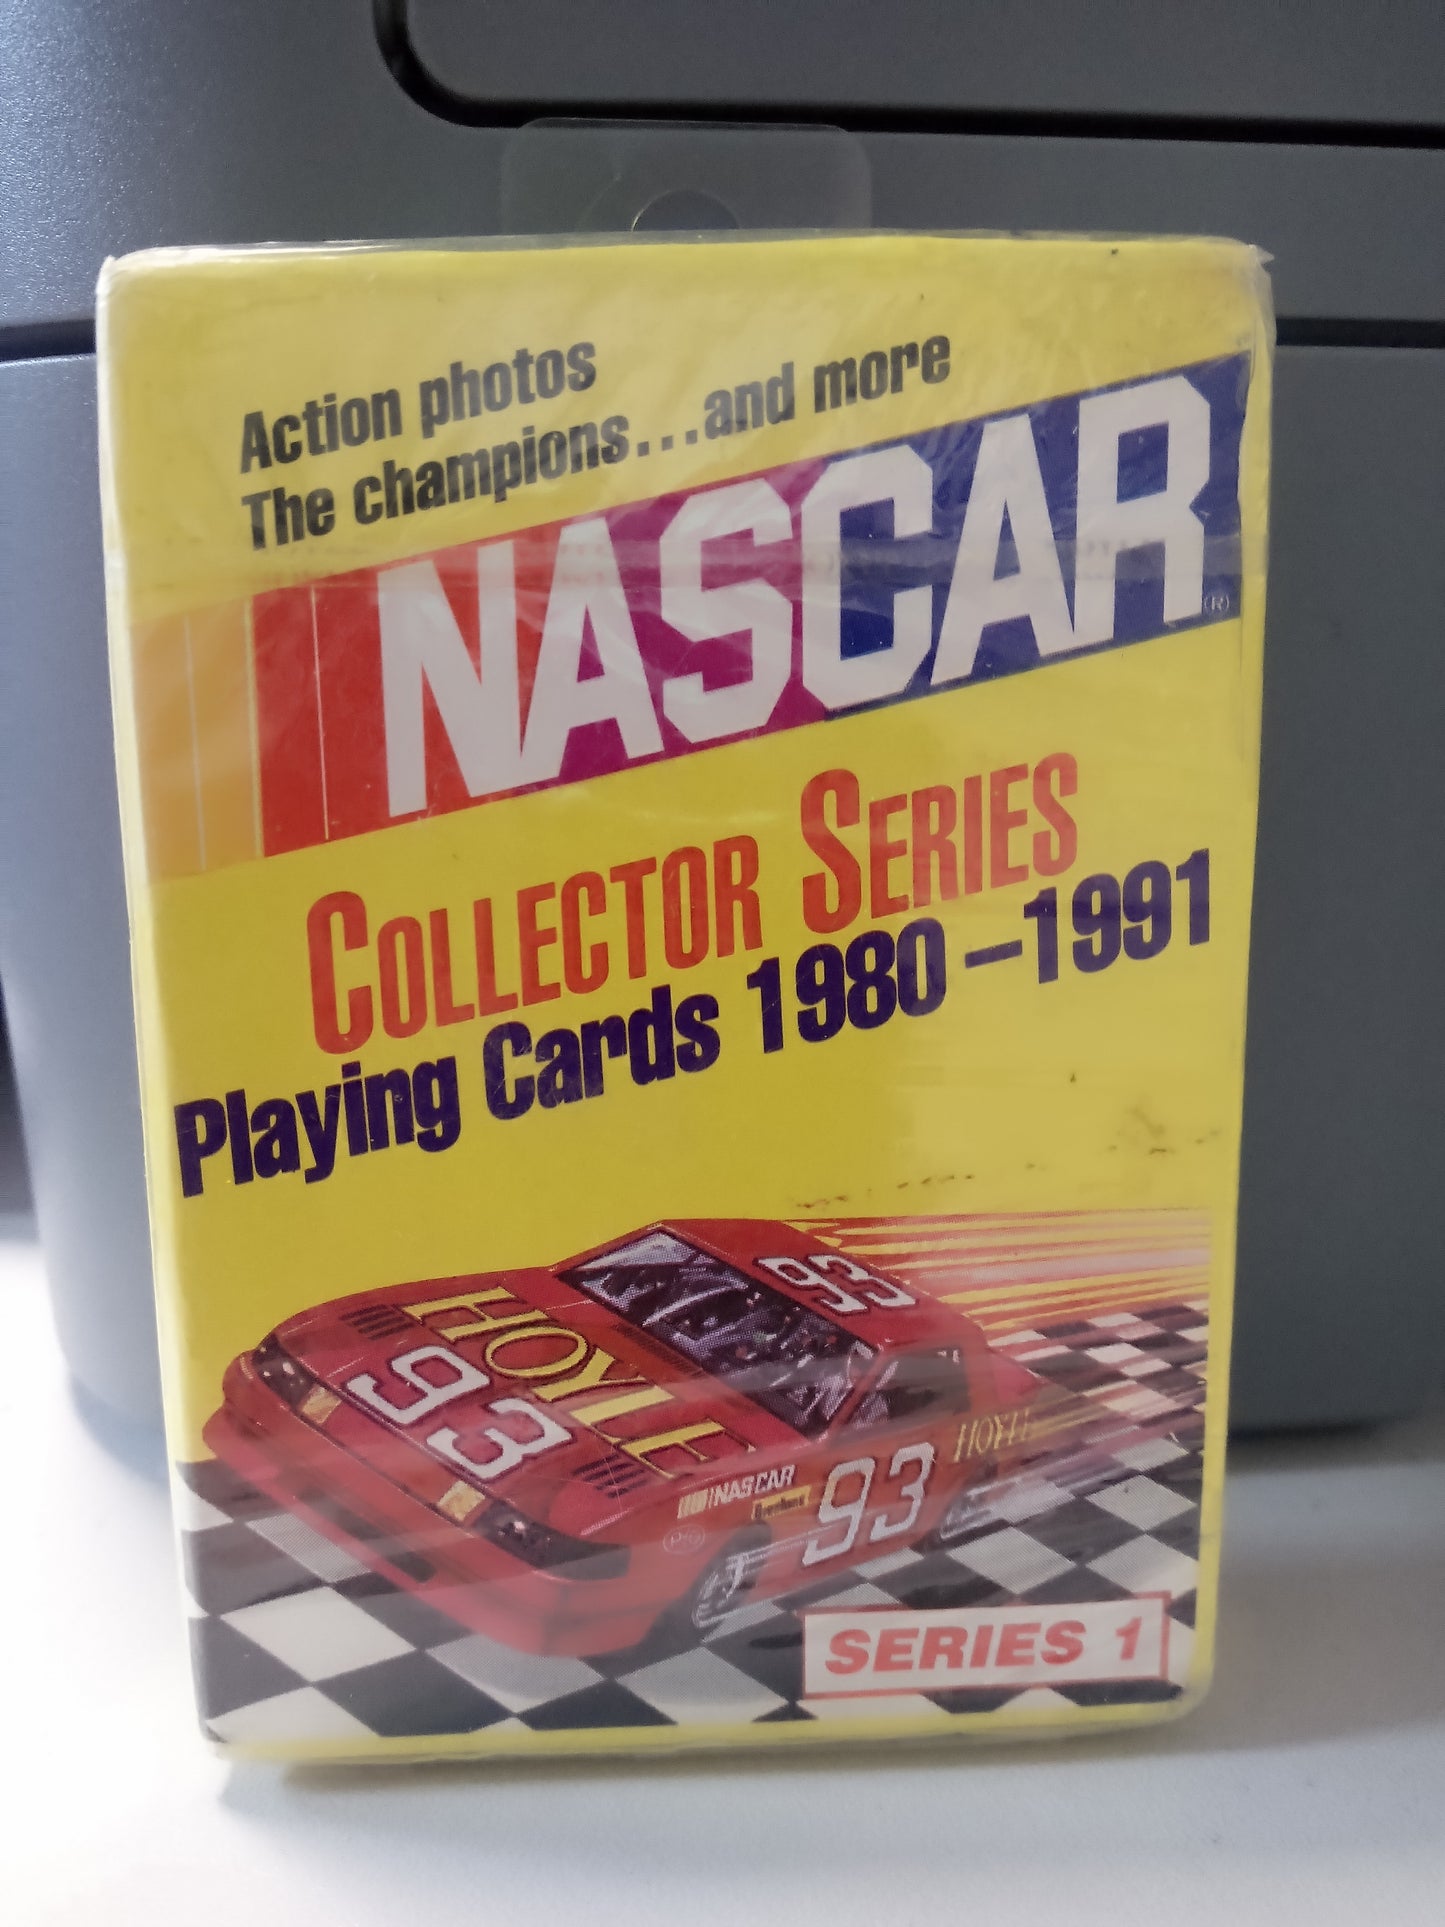 Nascar Collector Series 1 Playing Cards 1980 - 1991